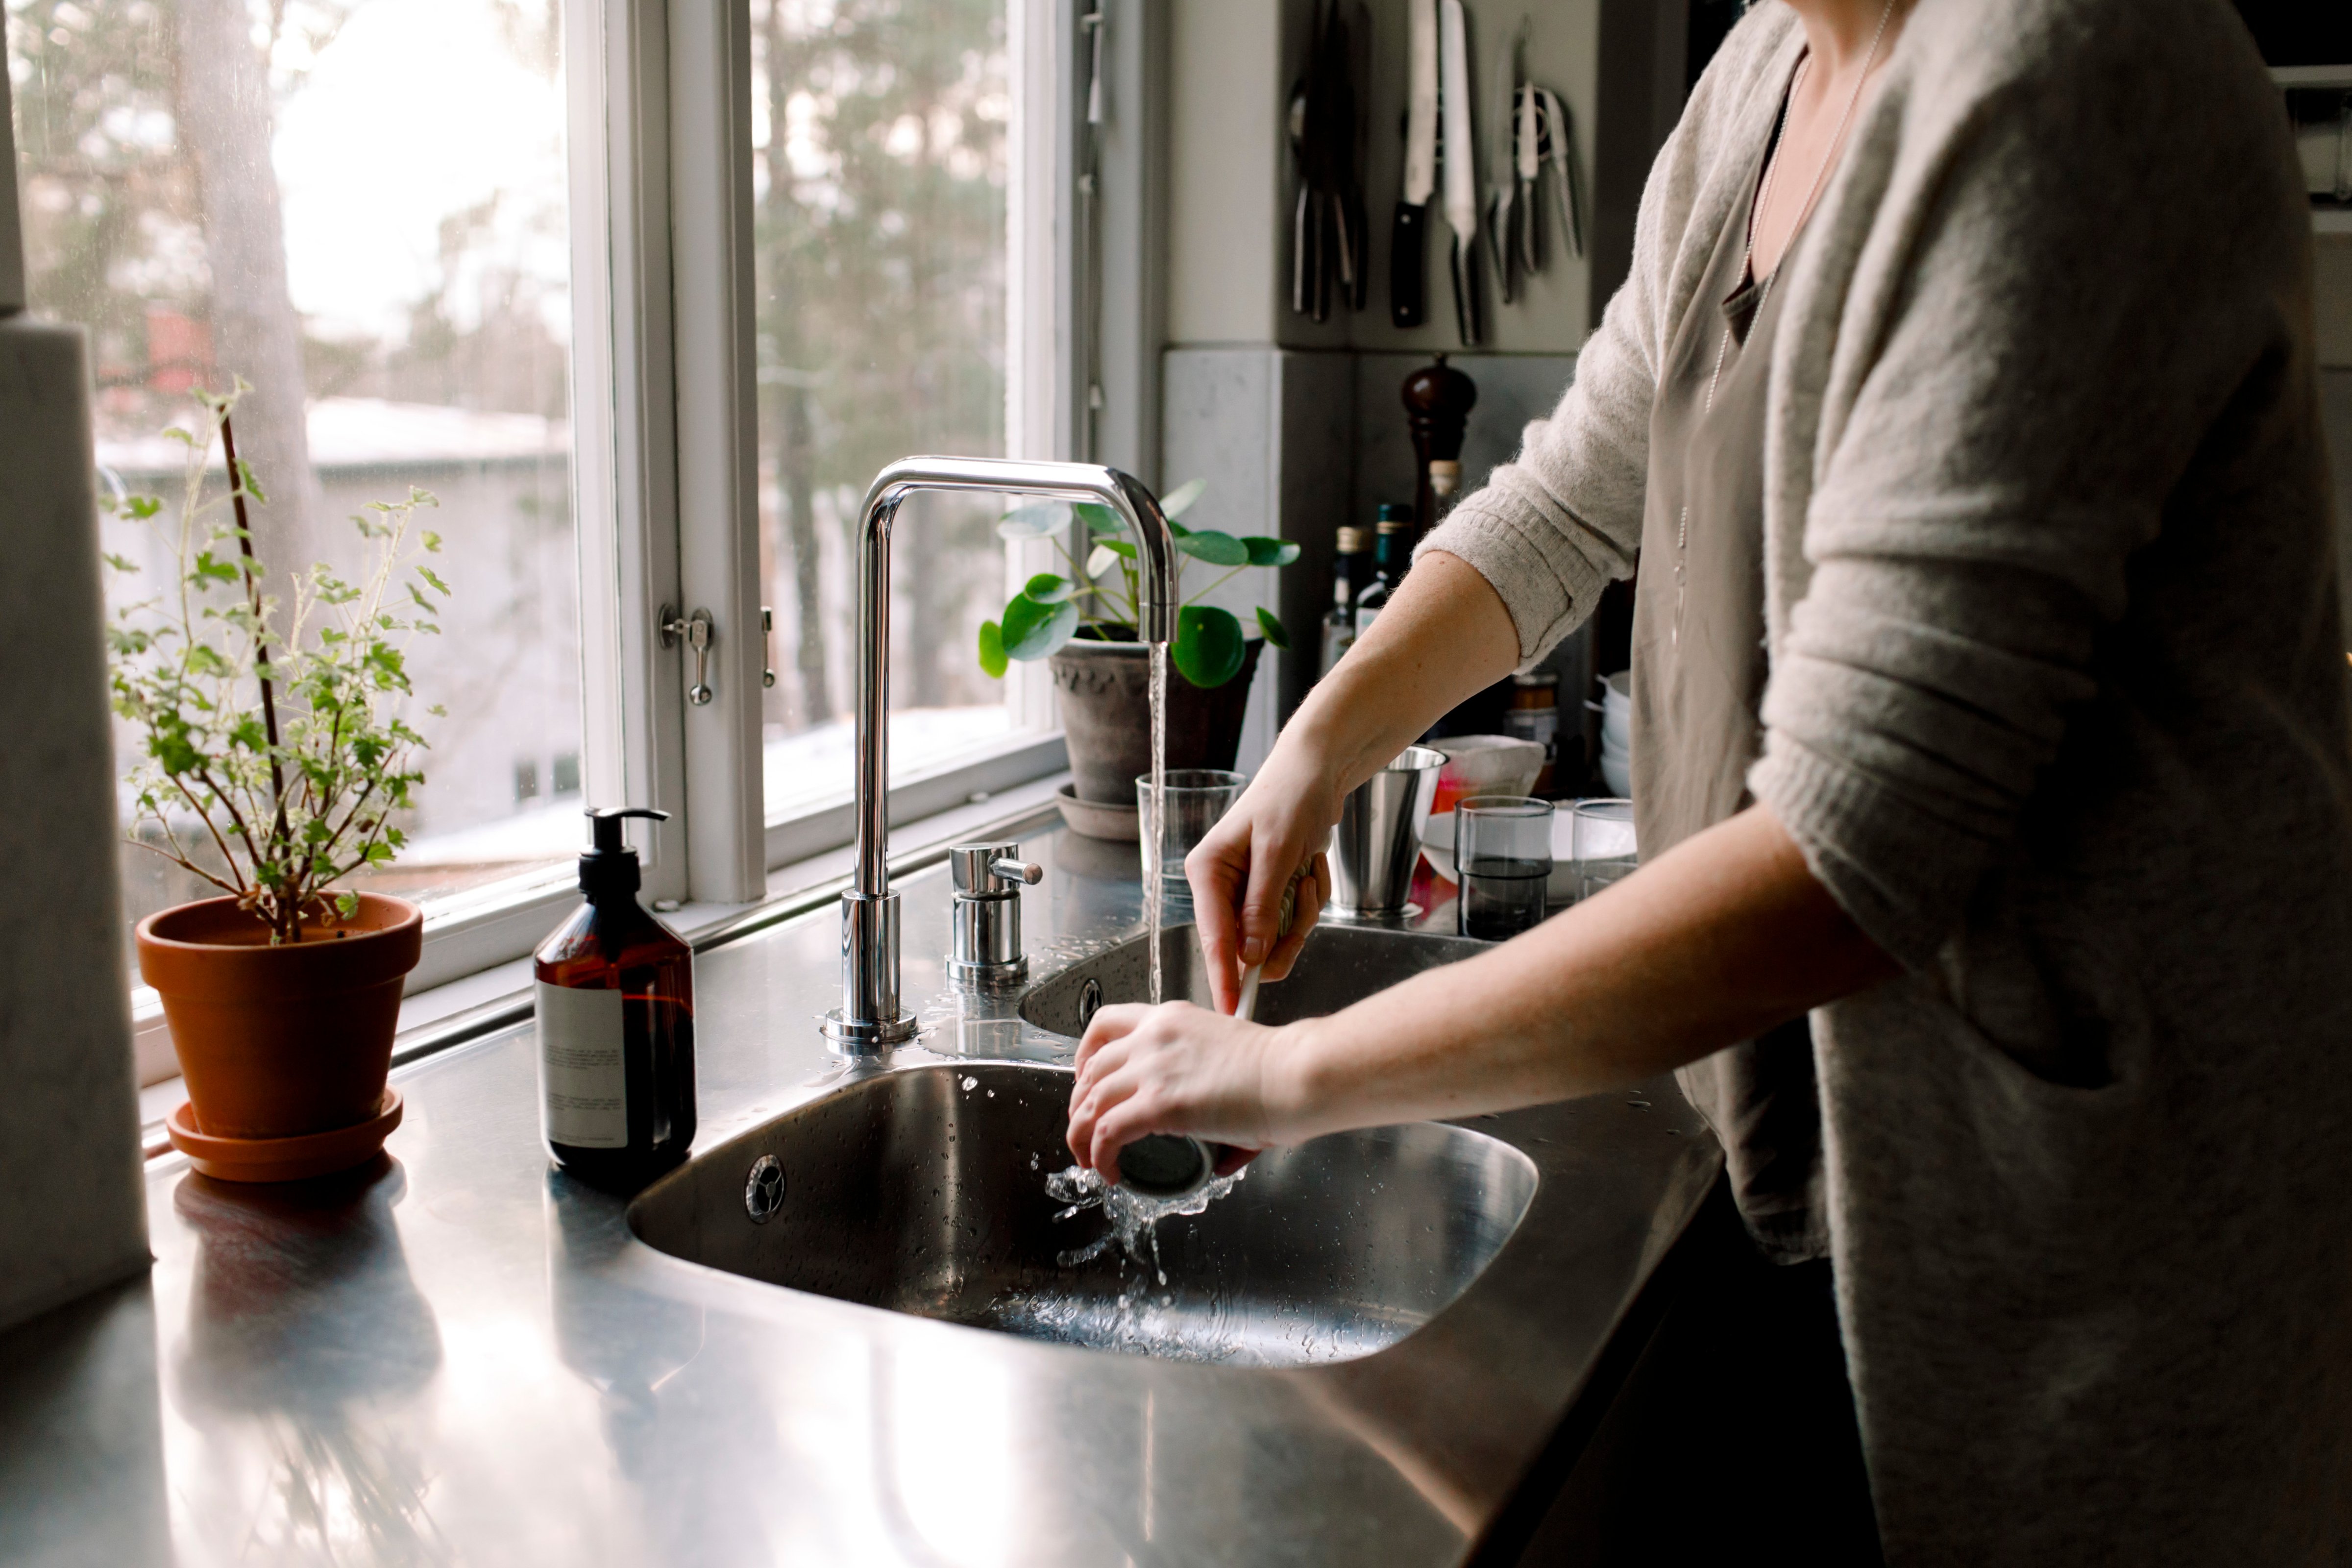 A woman cleans a cup in the kitchen sink at home